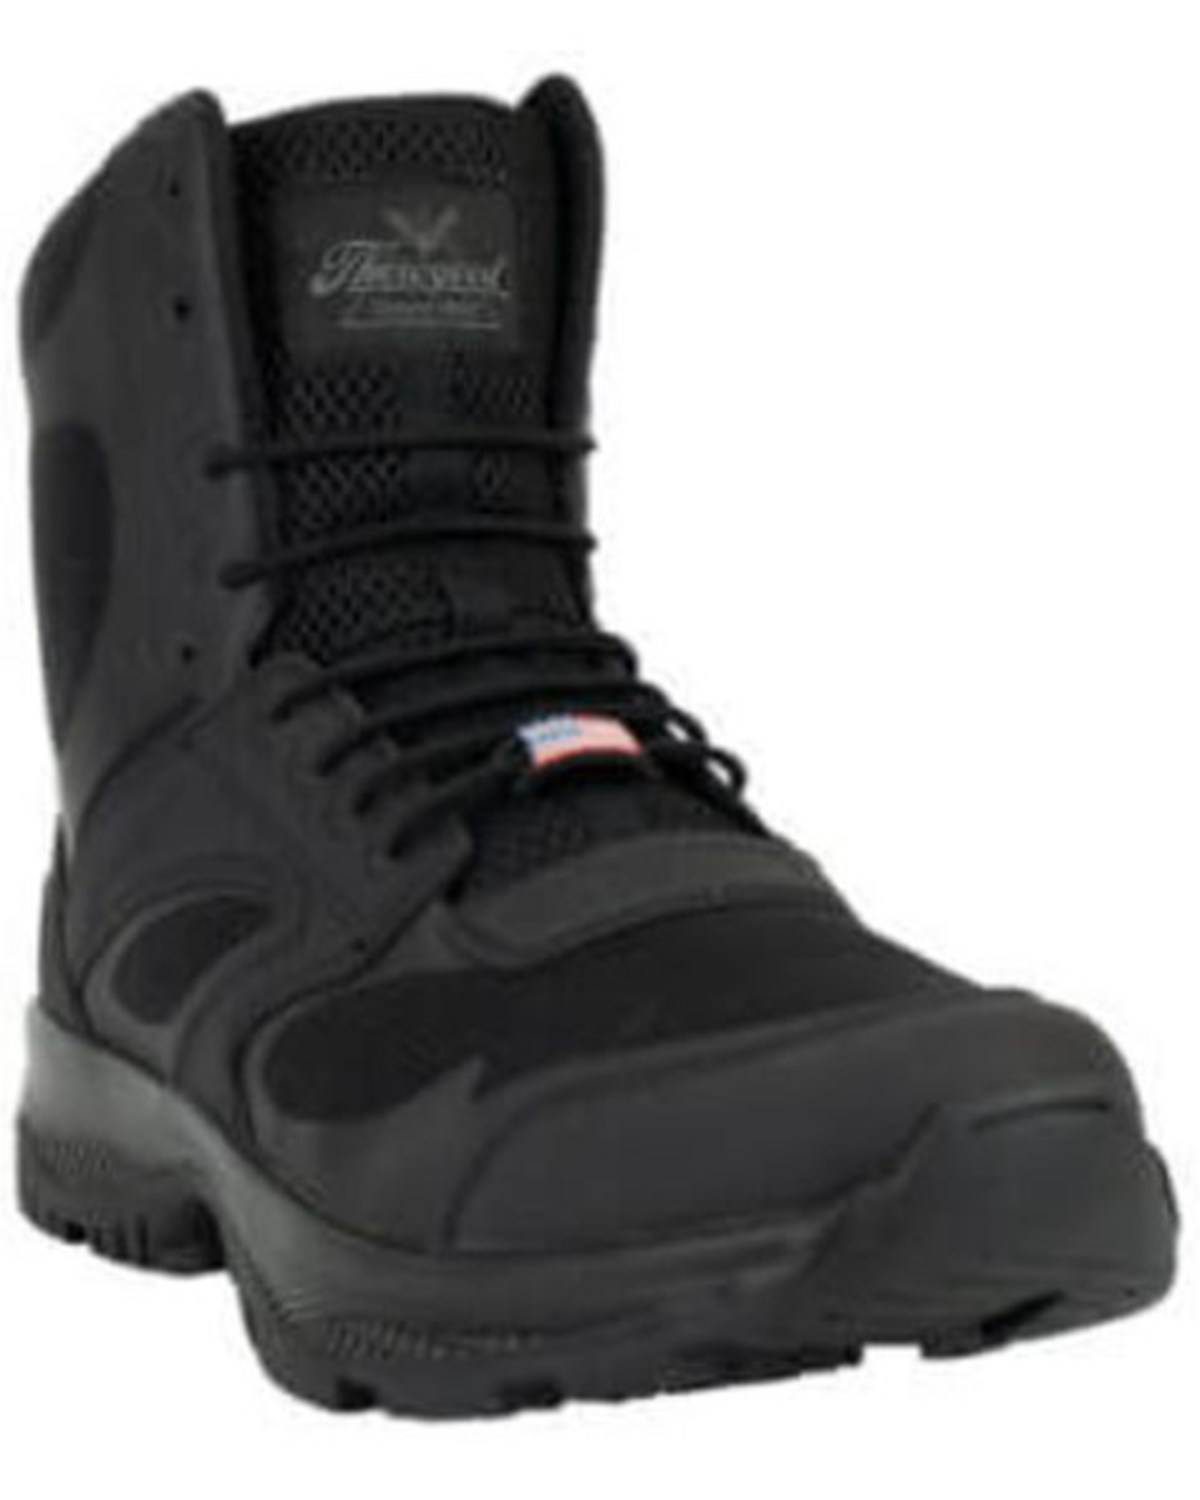 Thorogood Men's 7" Made The USA Lightweight Tactical Work Boots - Soft Toe